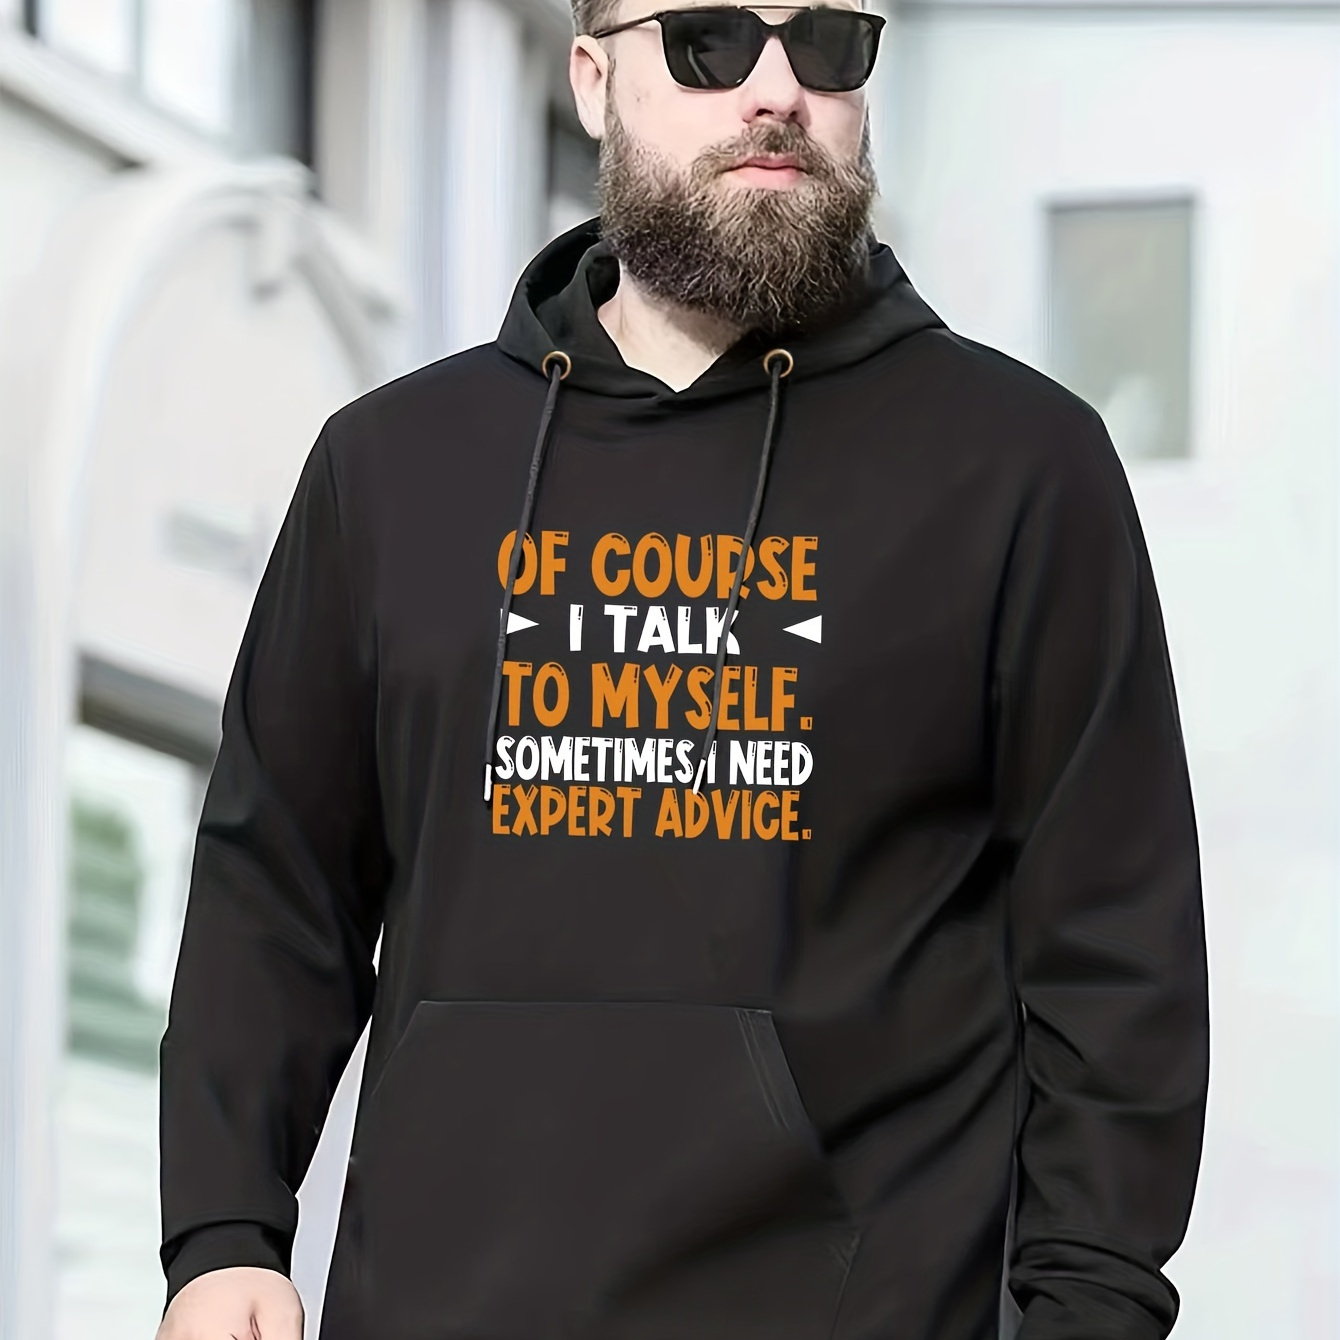 

Plus Size Men's "of Course I Talk To Myself" Print Hooded Sweatshirt Oversized Hoodies Fashion Casual Tops For Spring/autumn, Men's Clothing